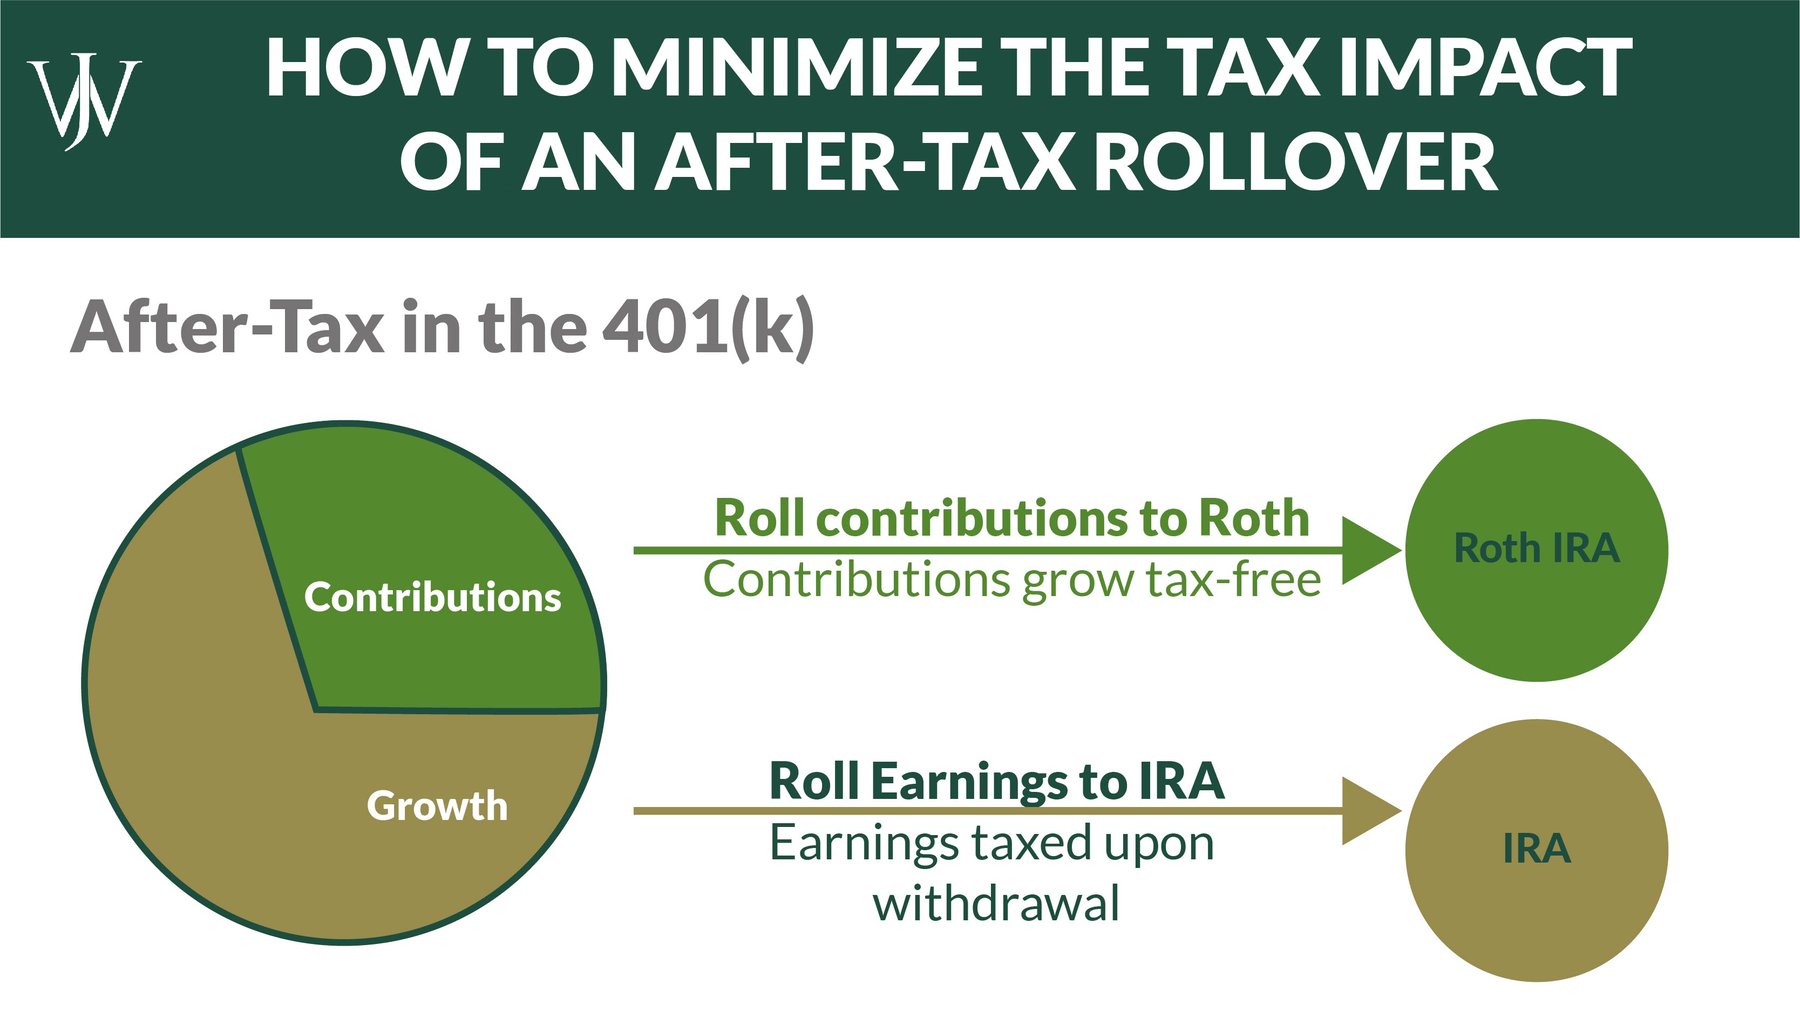 How to Rollover AfterTax Contributions from Chevron's 401(k) to a Roth IRA